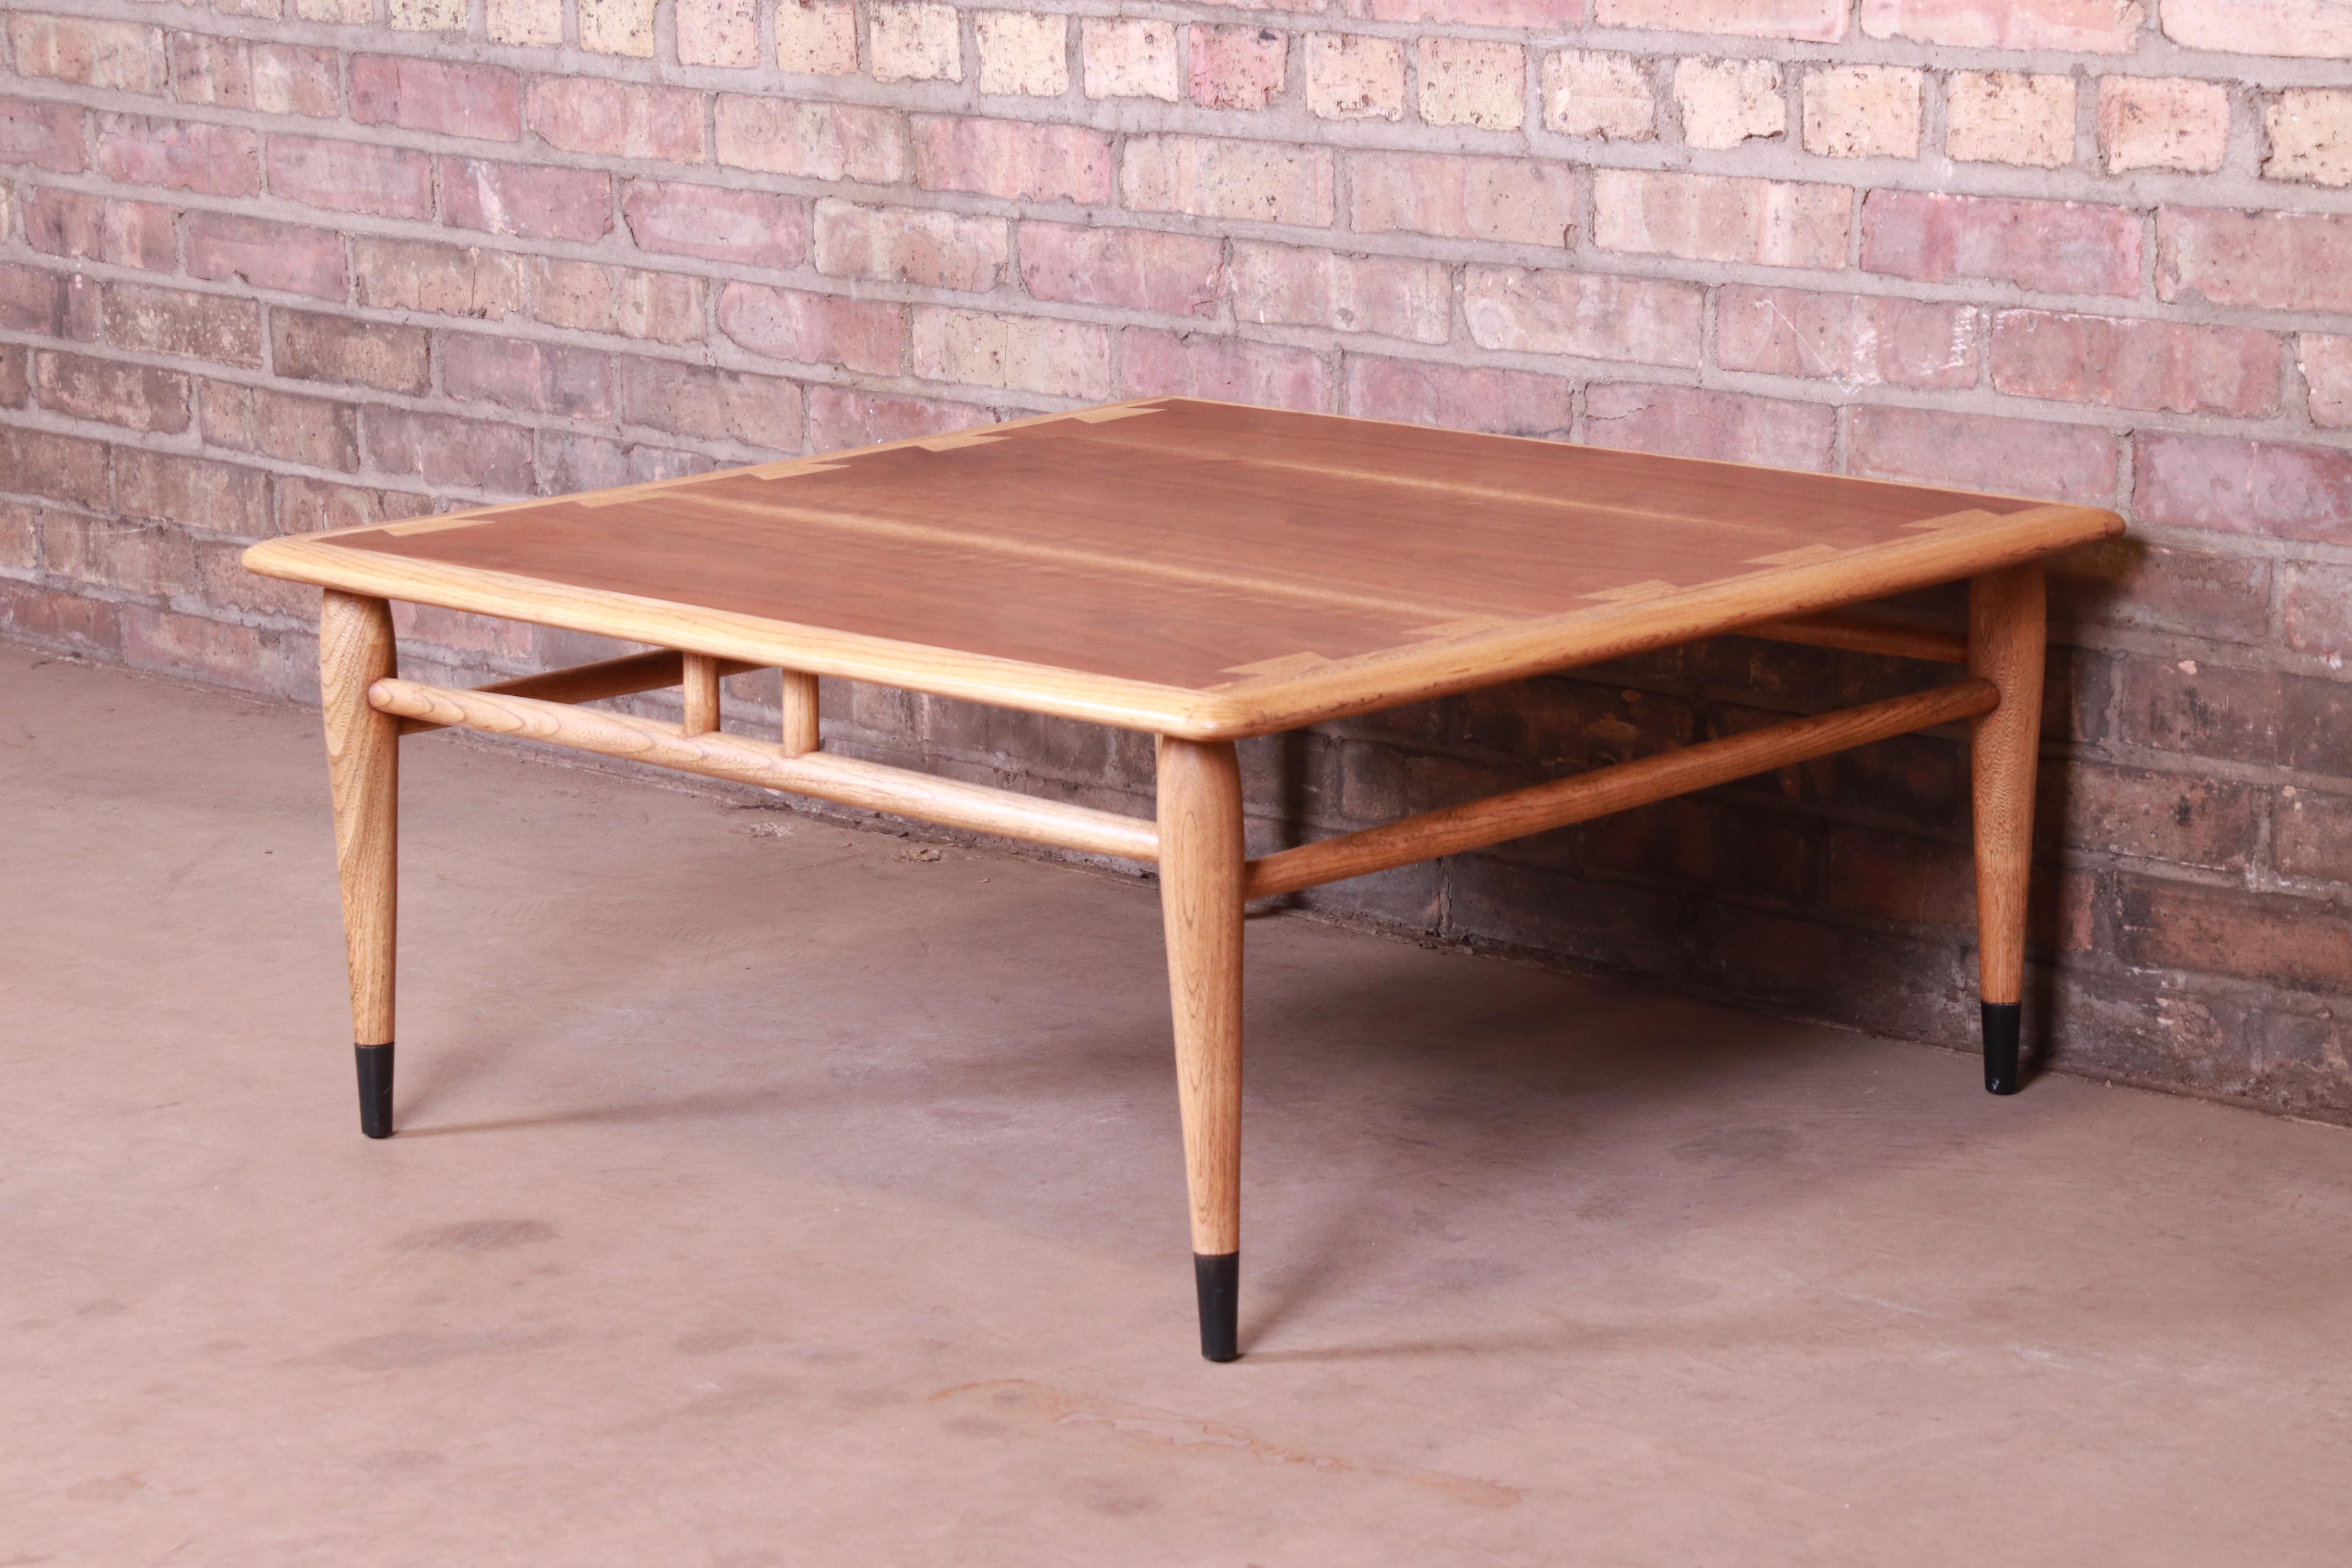 A gorgeous Mid-Century Modern coffee table

By Andre Bus for Lane Furniture 